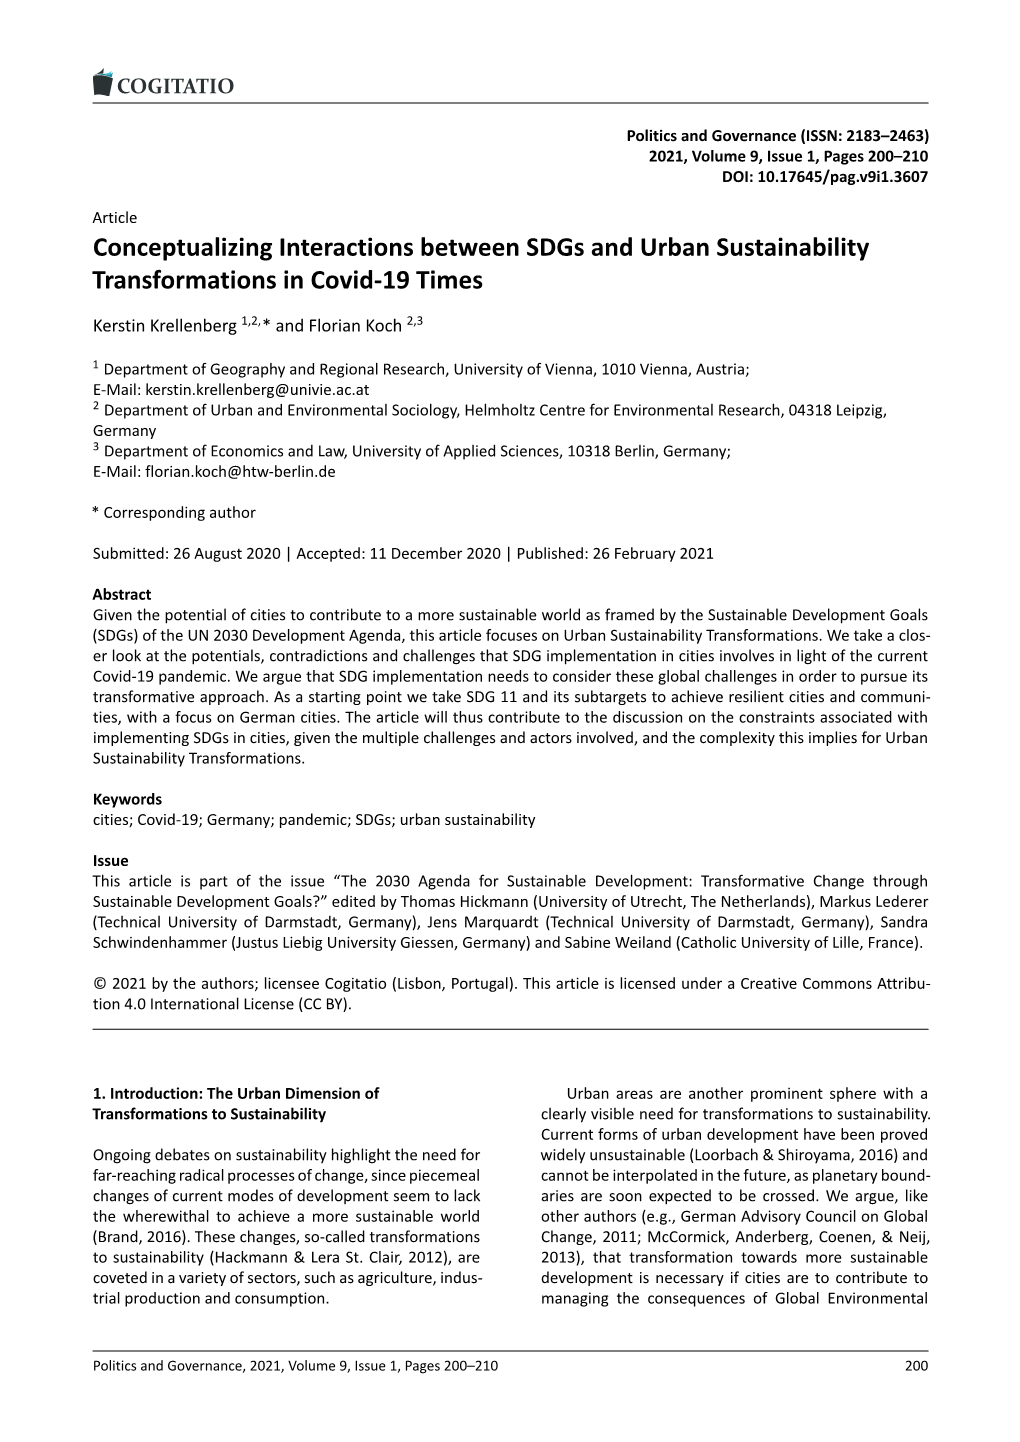 Conceptualizing Interactions Between Sdgs and Urban Sustainability Transformations in Covid-19 Times